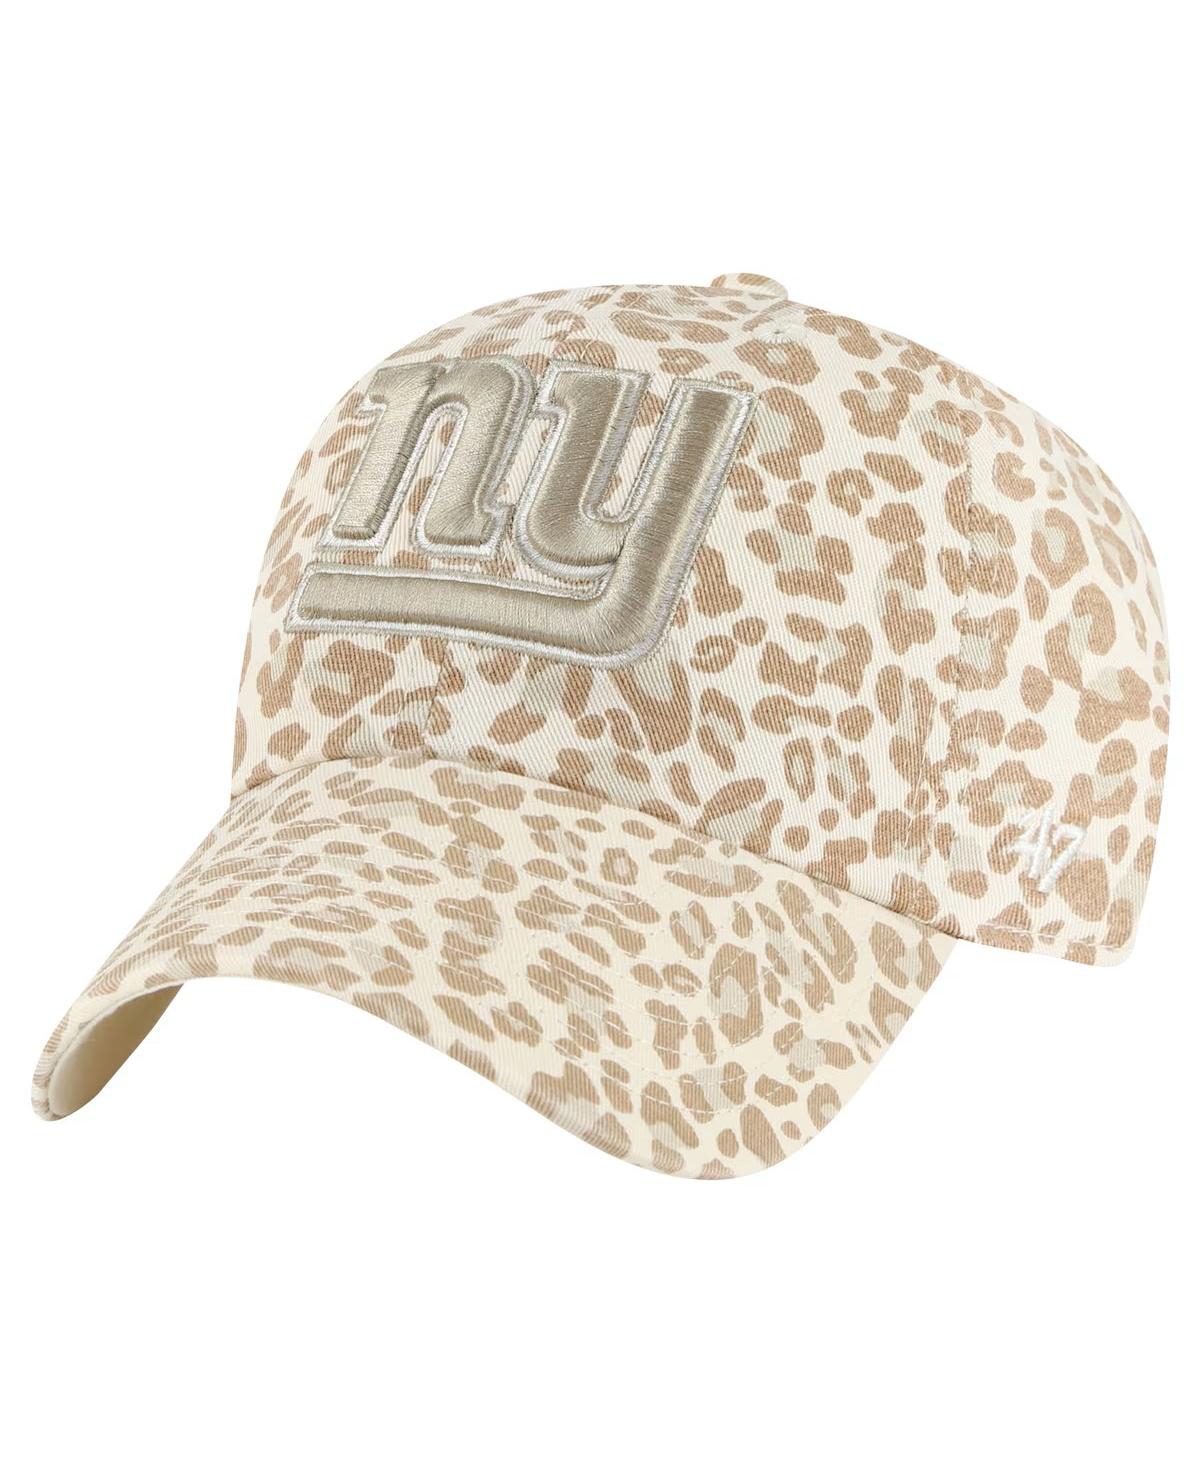 47 Women's Natural New York Giants Panthera Clean Up Adjustable Hat - Natural